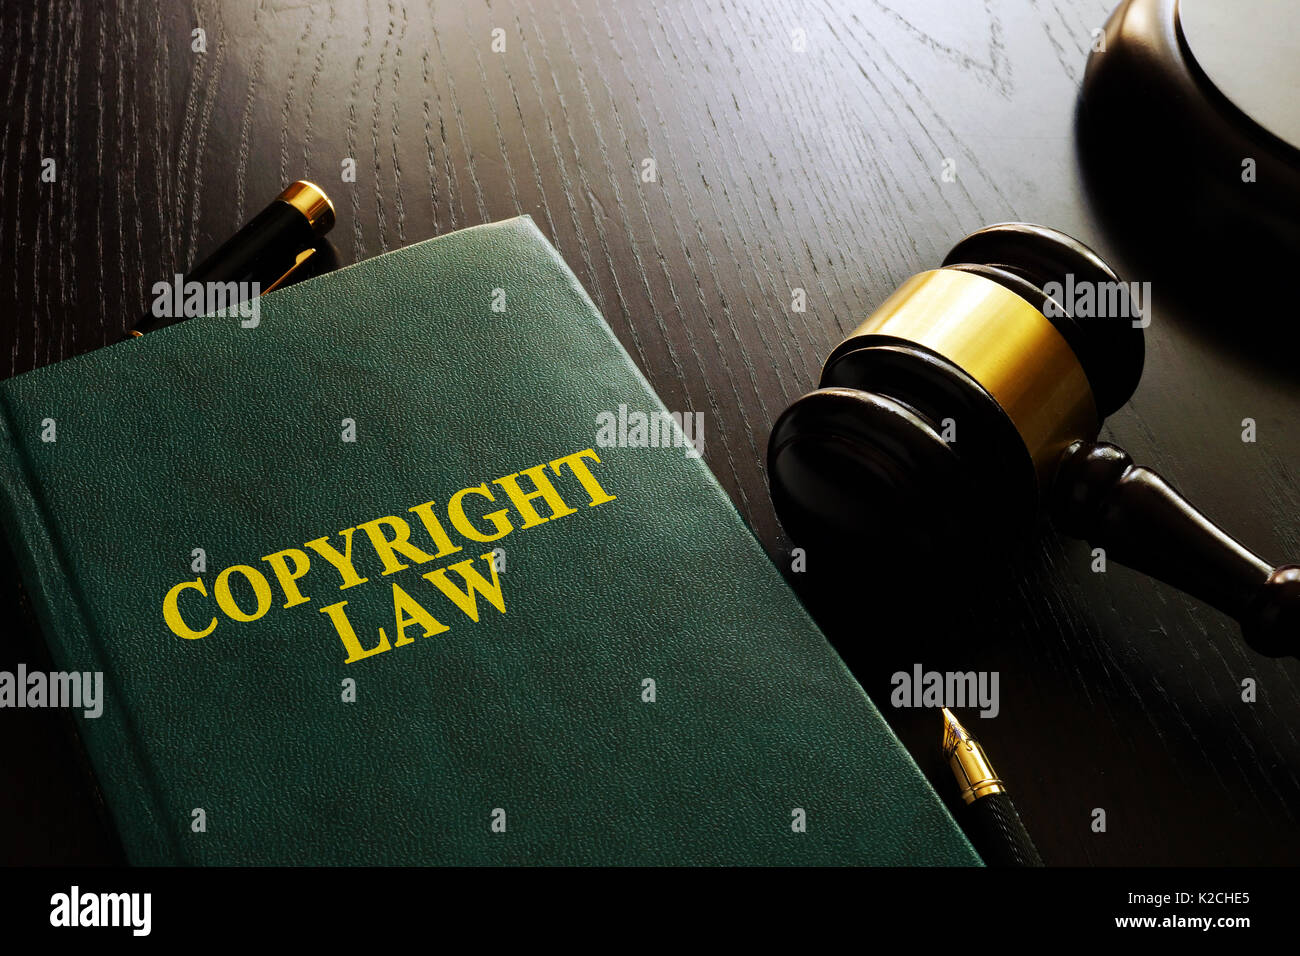 Copyright law and gavel on a table. Stock Photo